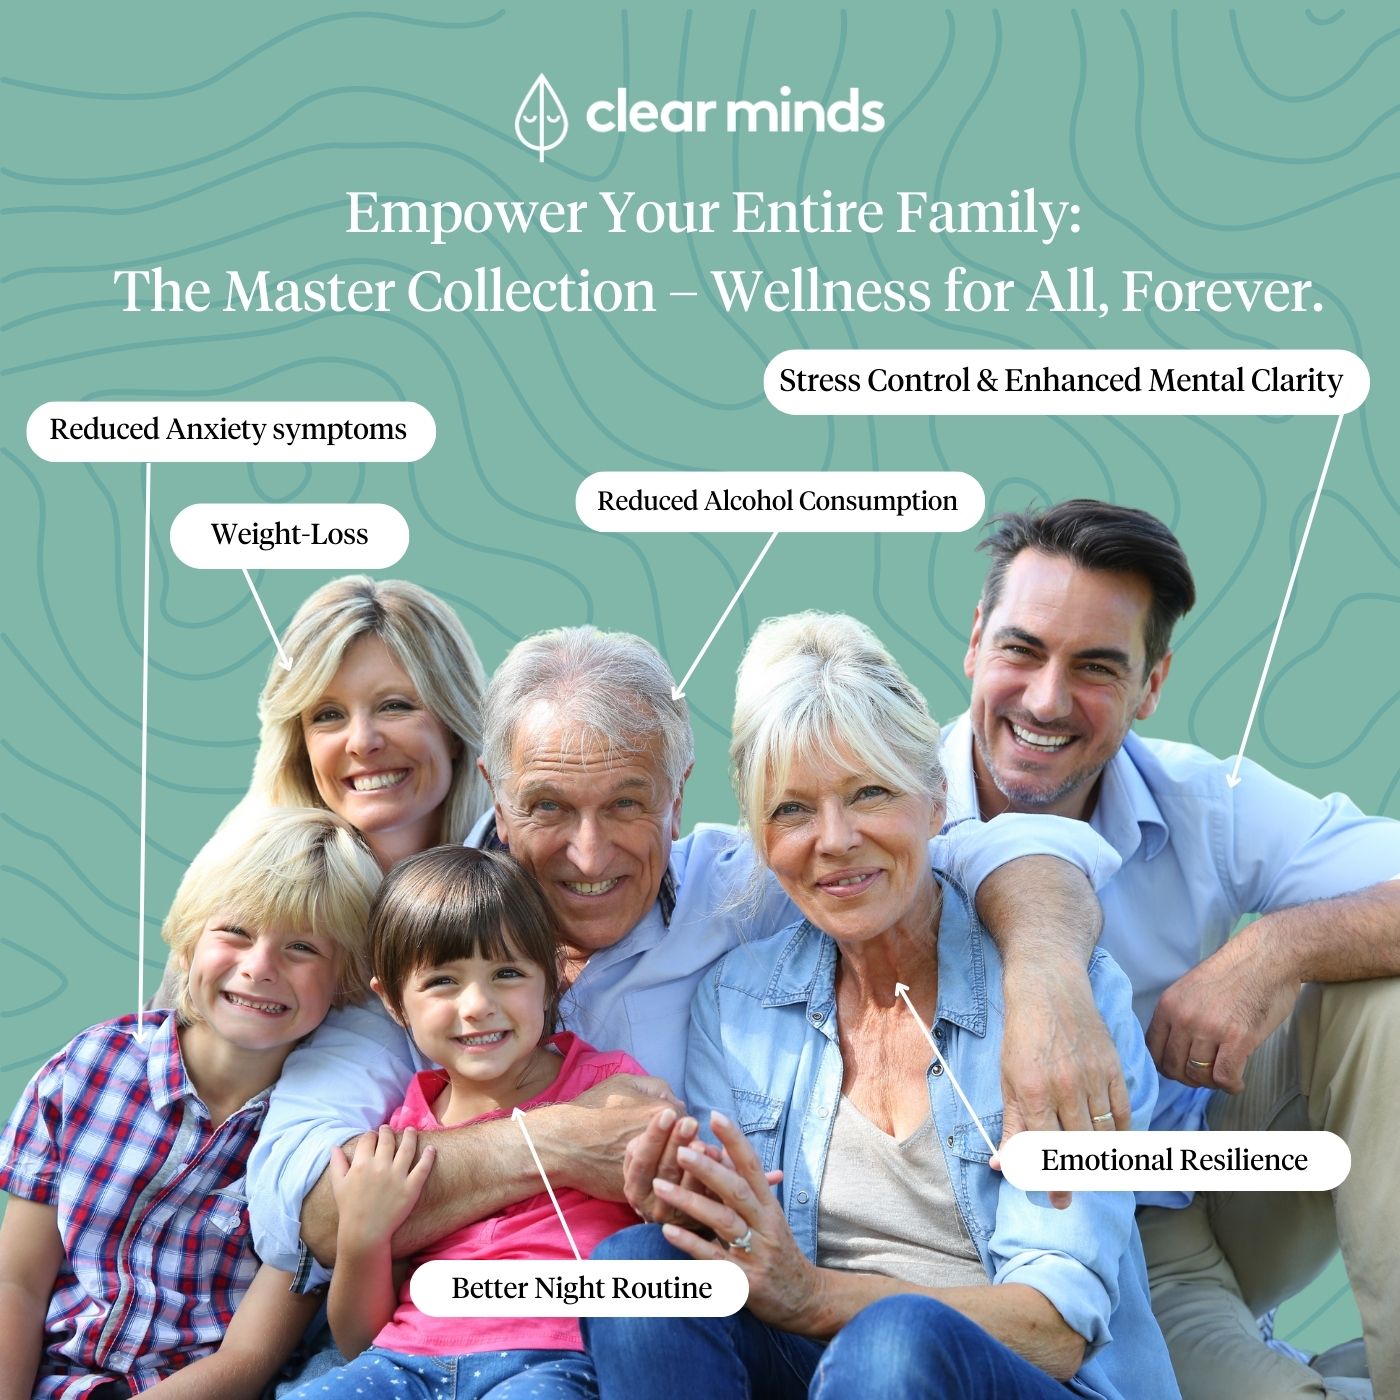 Master Collection Hypnotherapy - Lifetime All Access Family Package  (200+ Sessions)